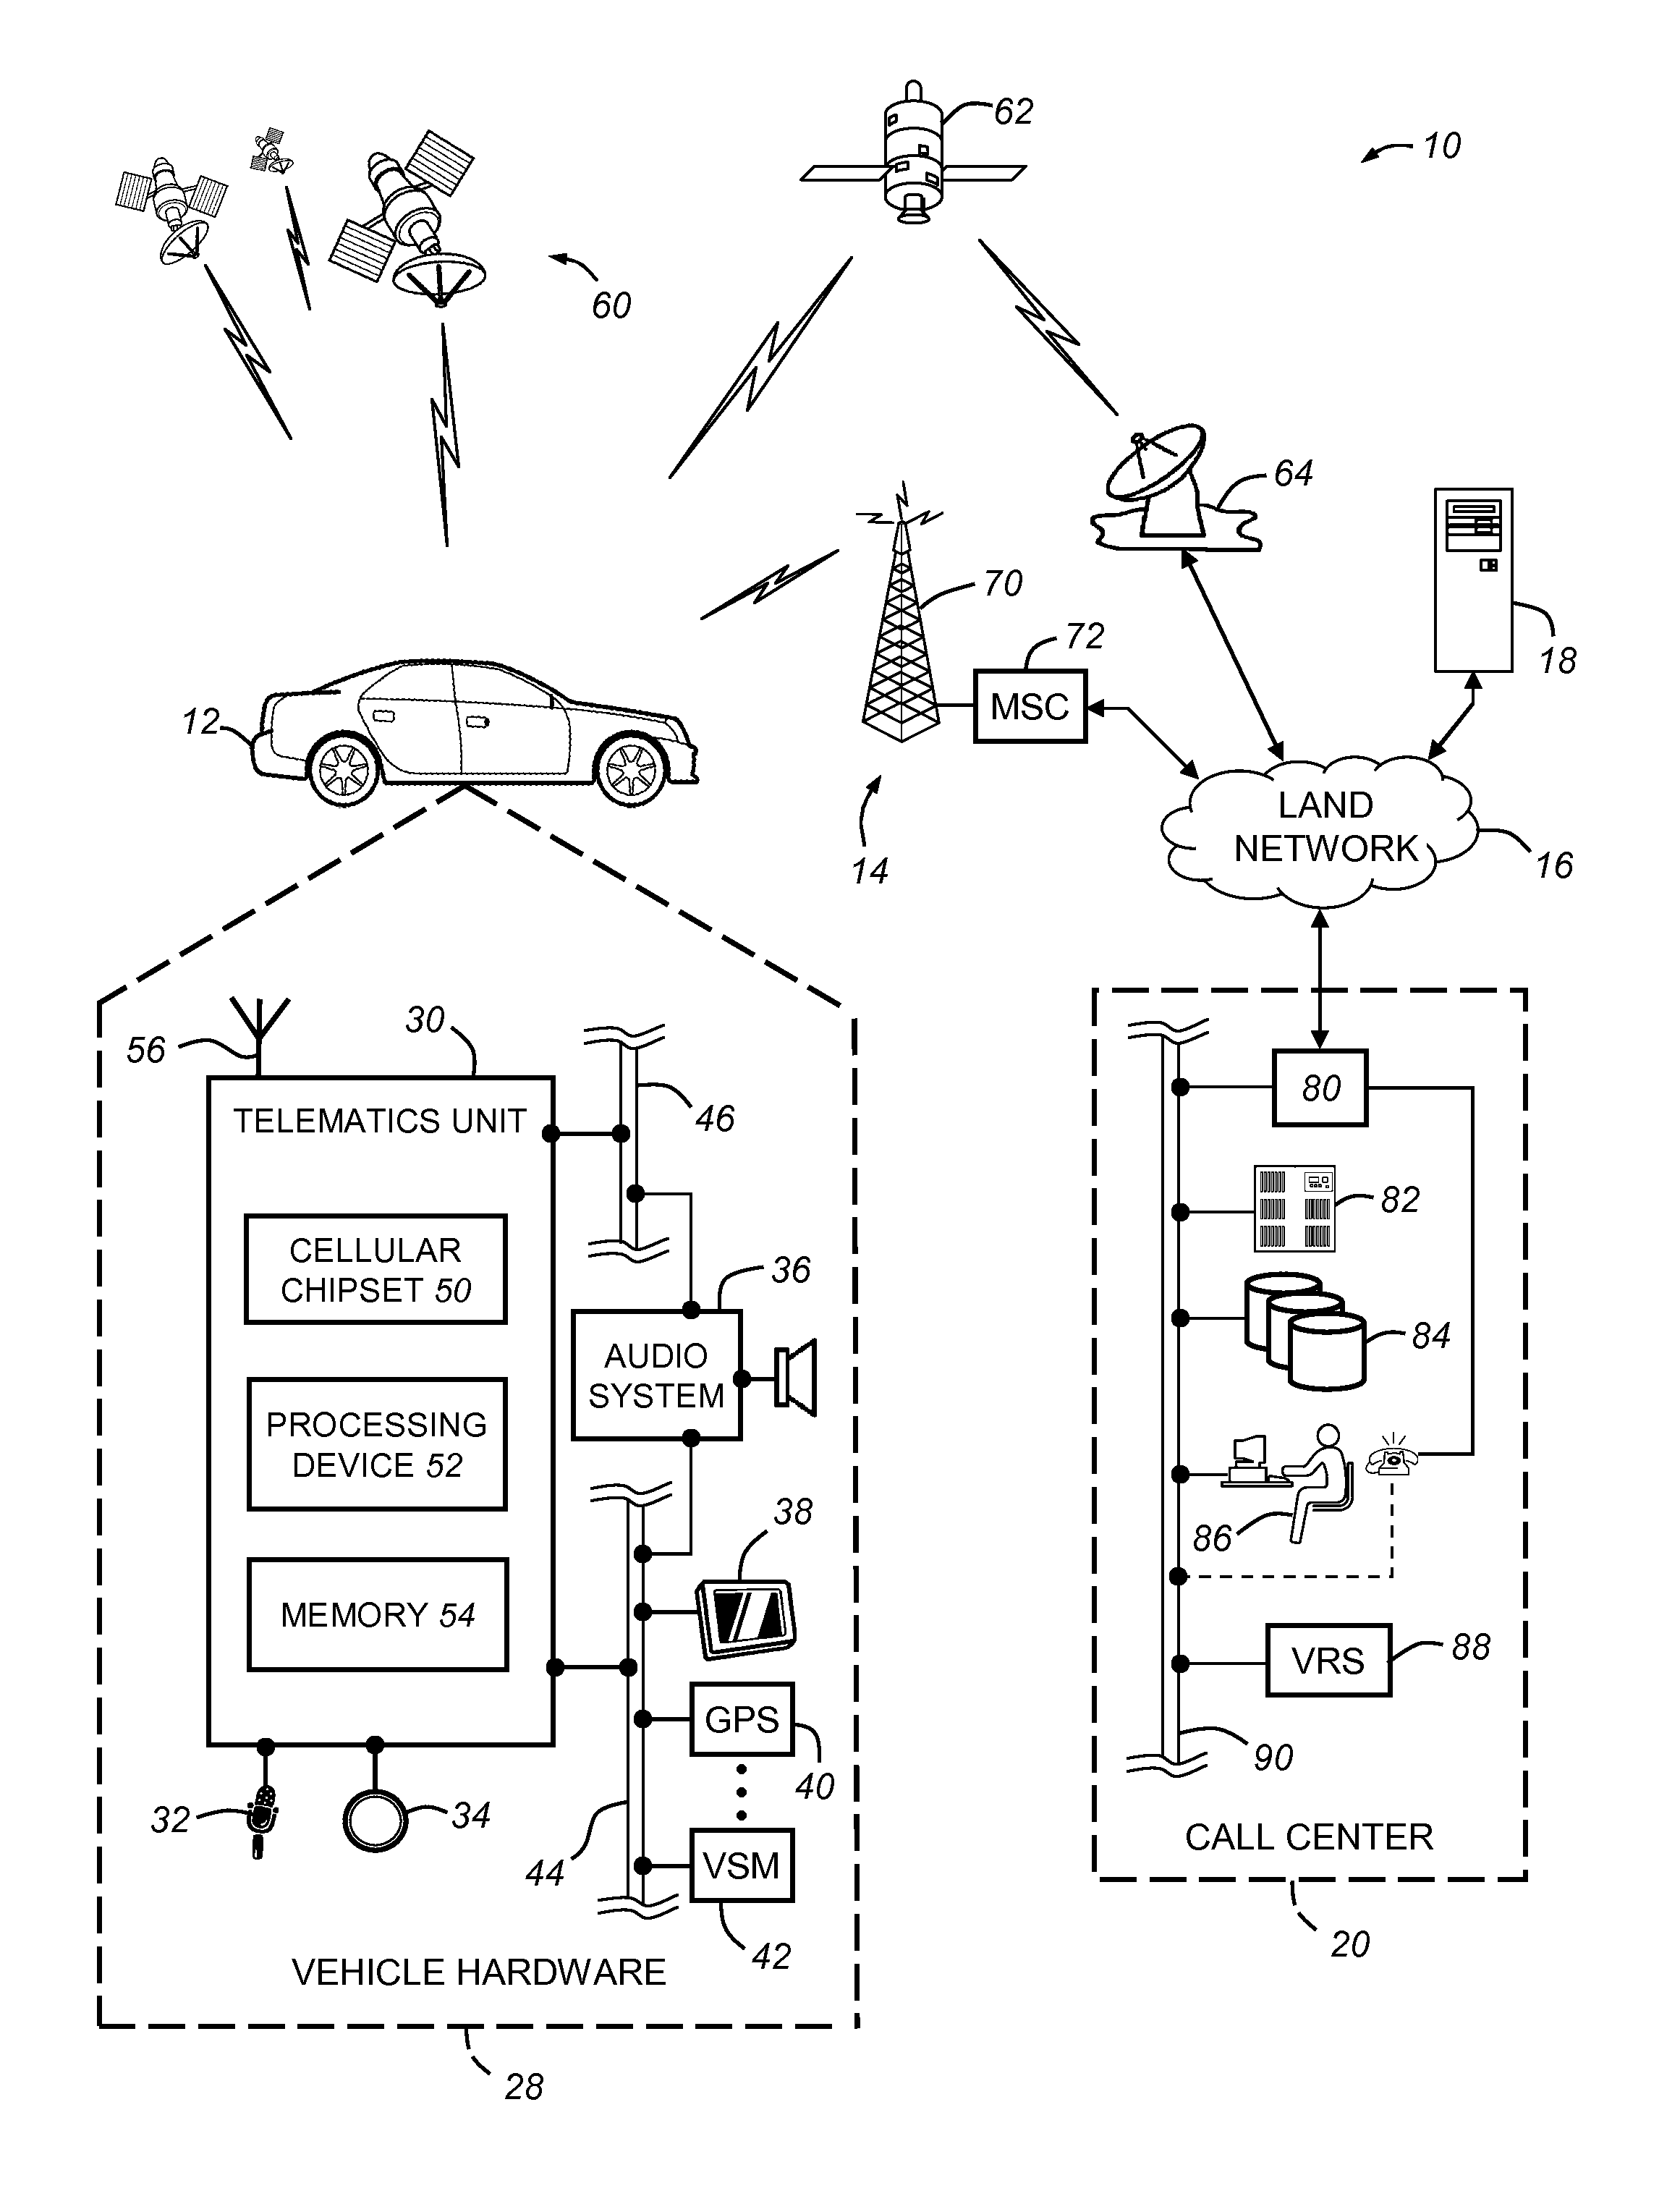 Switching between acoustic parameters in a convertible vehicle